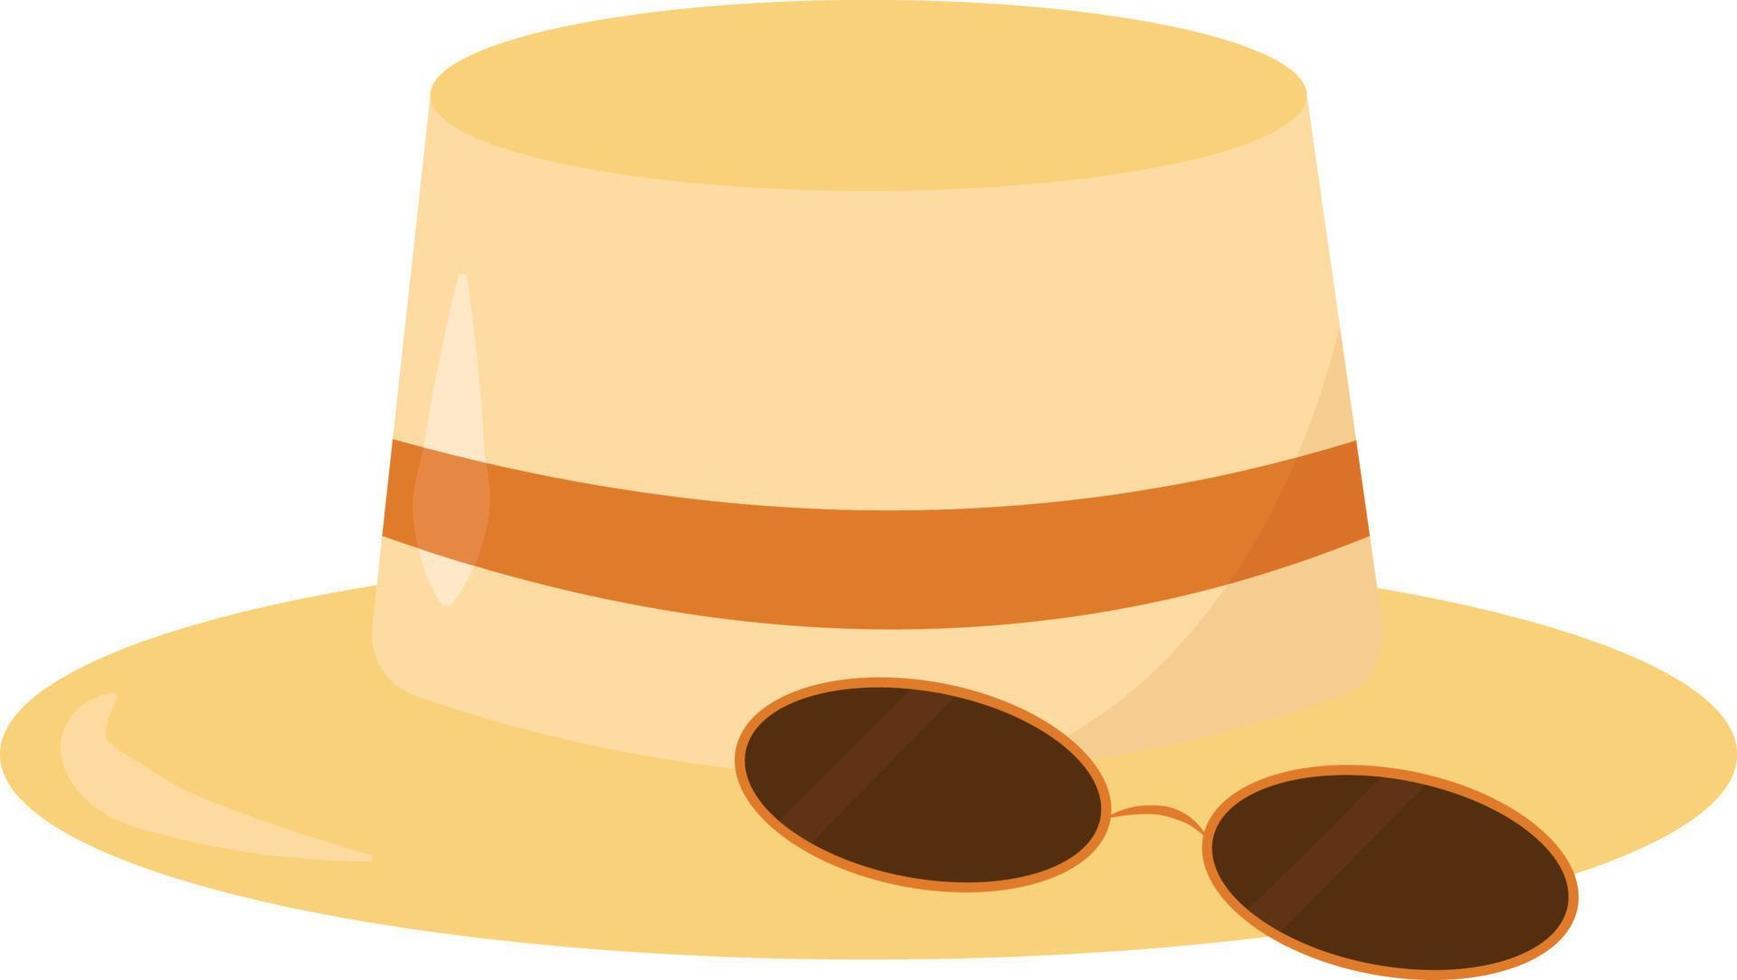 Summer hat with glasses, illustration, vector on white background.